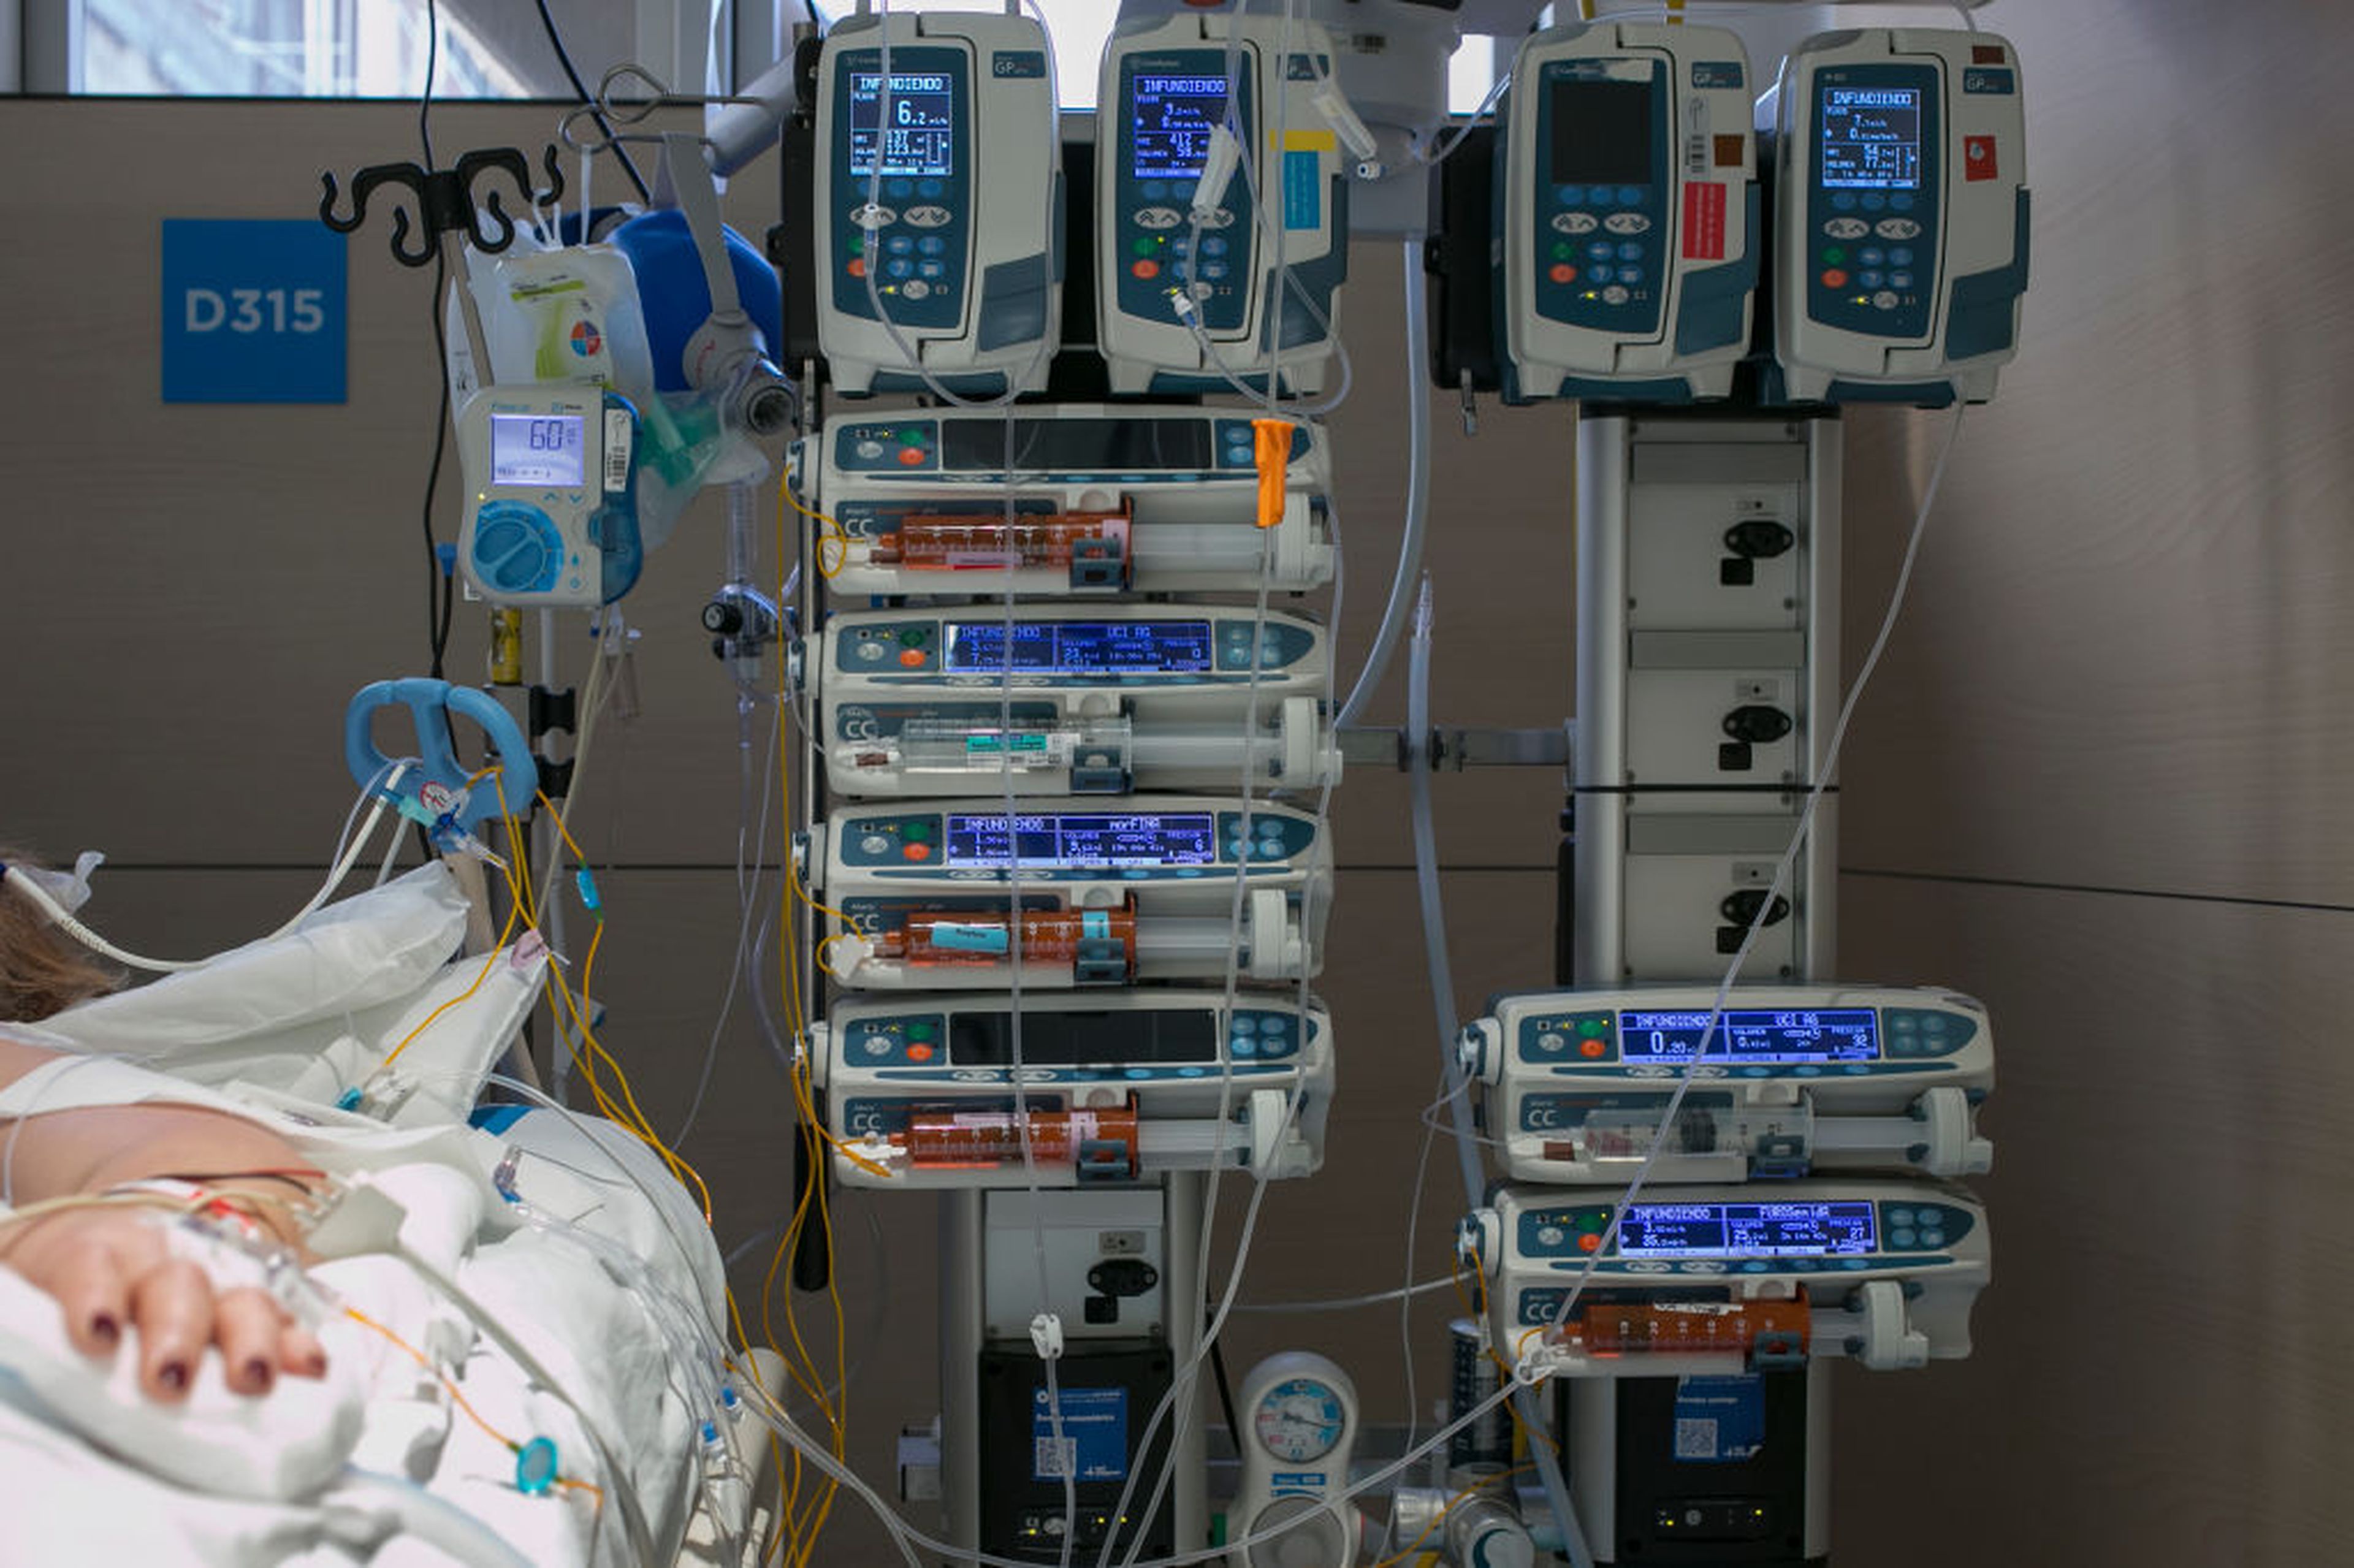 Medical devices are a crucial piece to any healthcare delivery organizations, but remain a key security risk for the sector. New HSCC guidance targets the relationship between manufacturers and delivery organizations beginning at the contract process. (Photo by Manuel Medir/Getty Images)